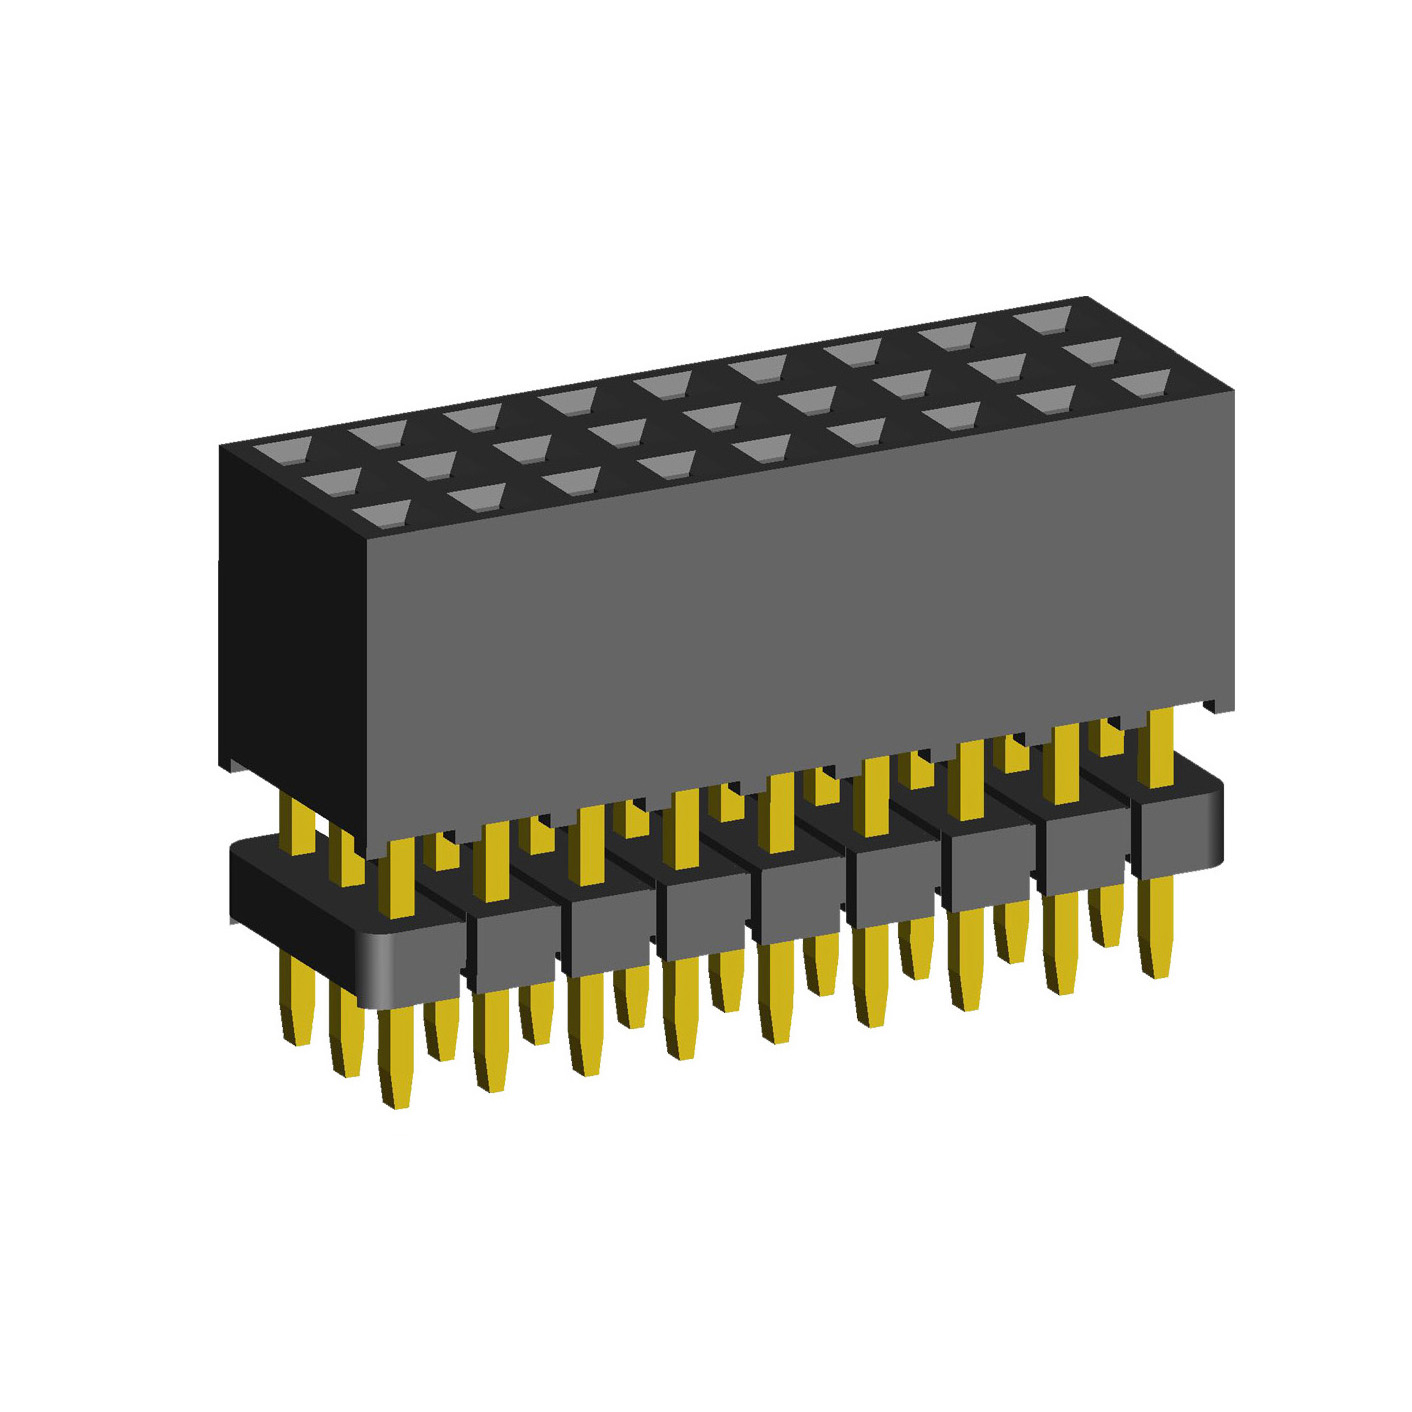 2203SDI-XXXG-935 series, straight three-row sockets with increased insulator on the Board for mounting in holes, pitch 2,0x2,0 mm, Board-to-Board connectors, pin headers and sockets > pitch 2,0x2,0 mm